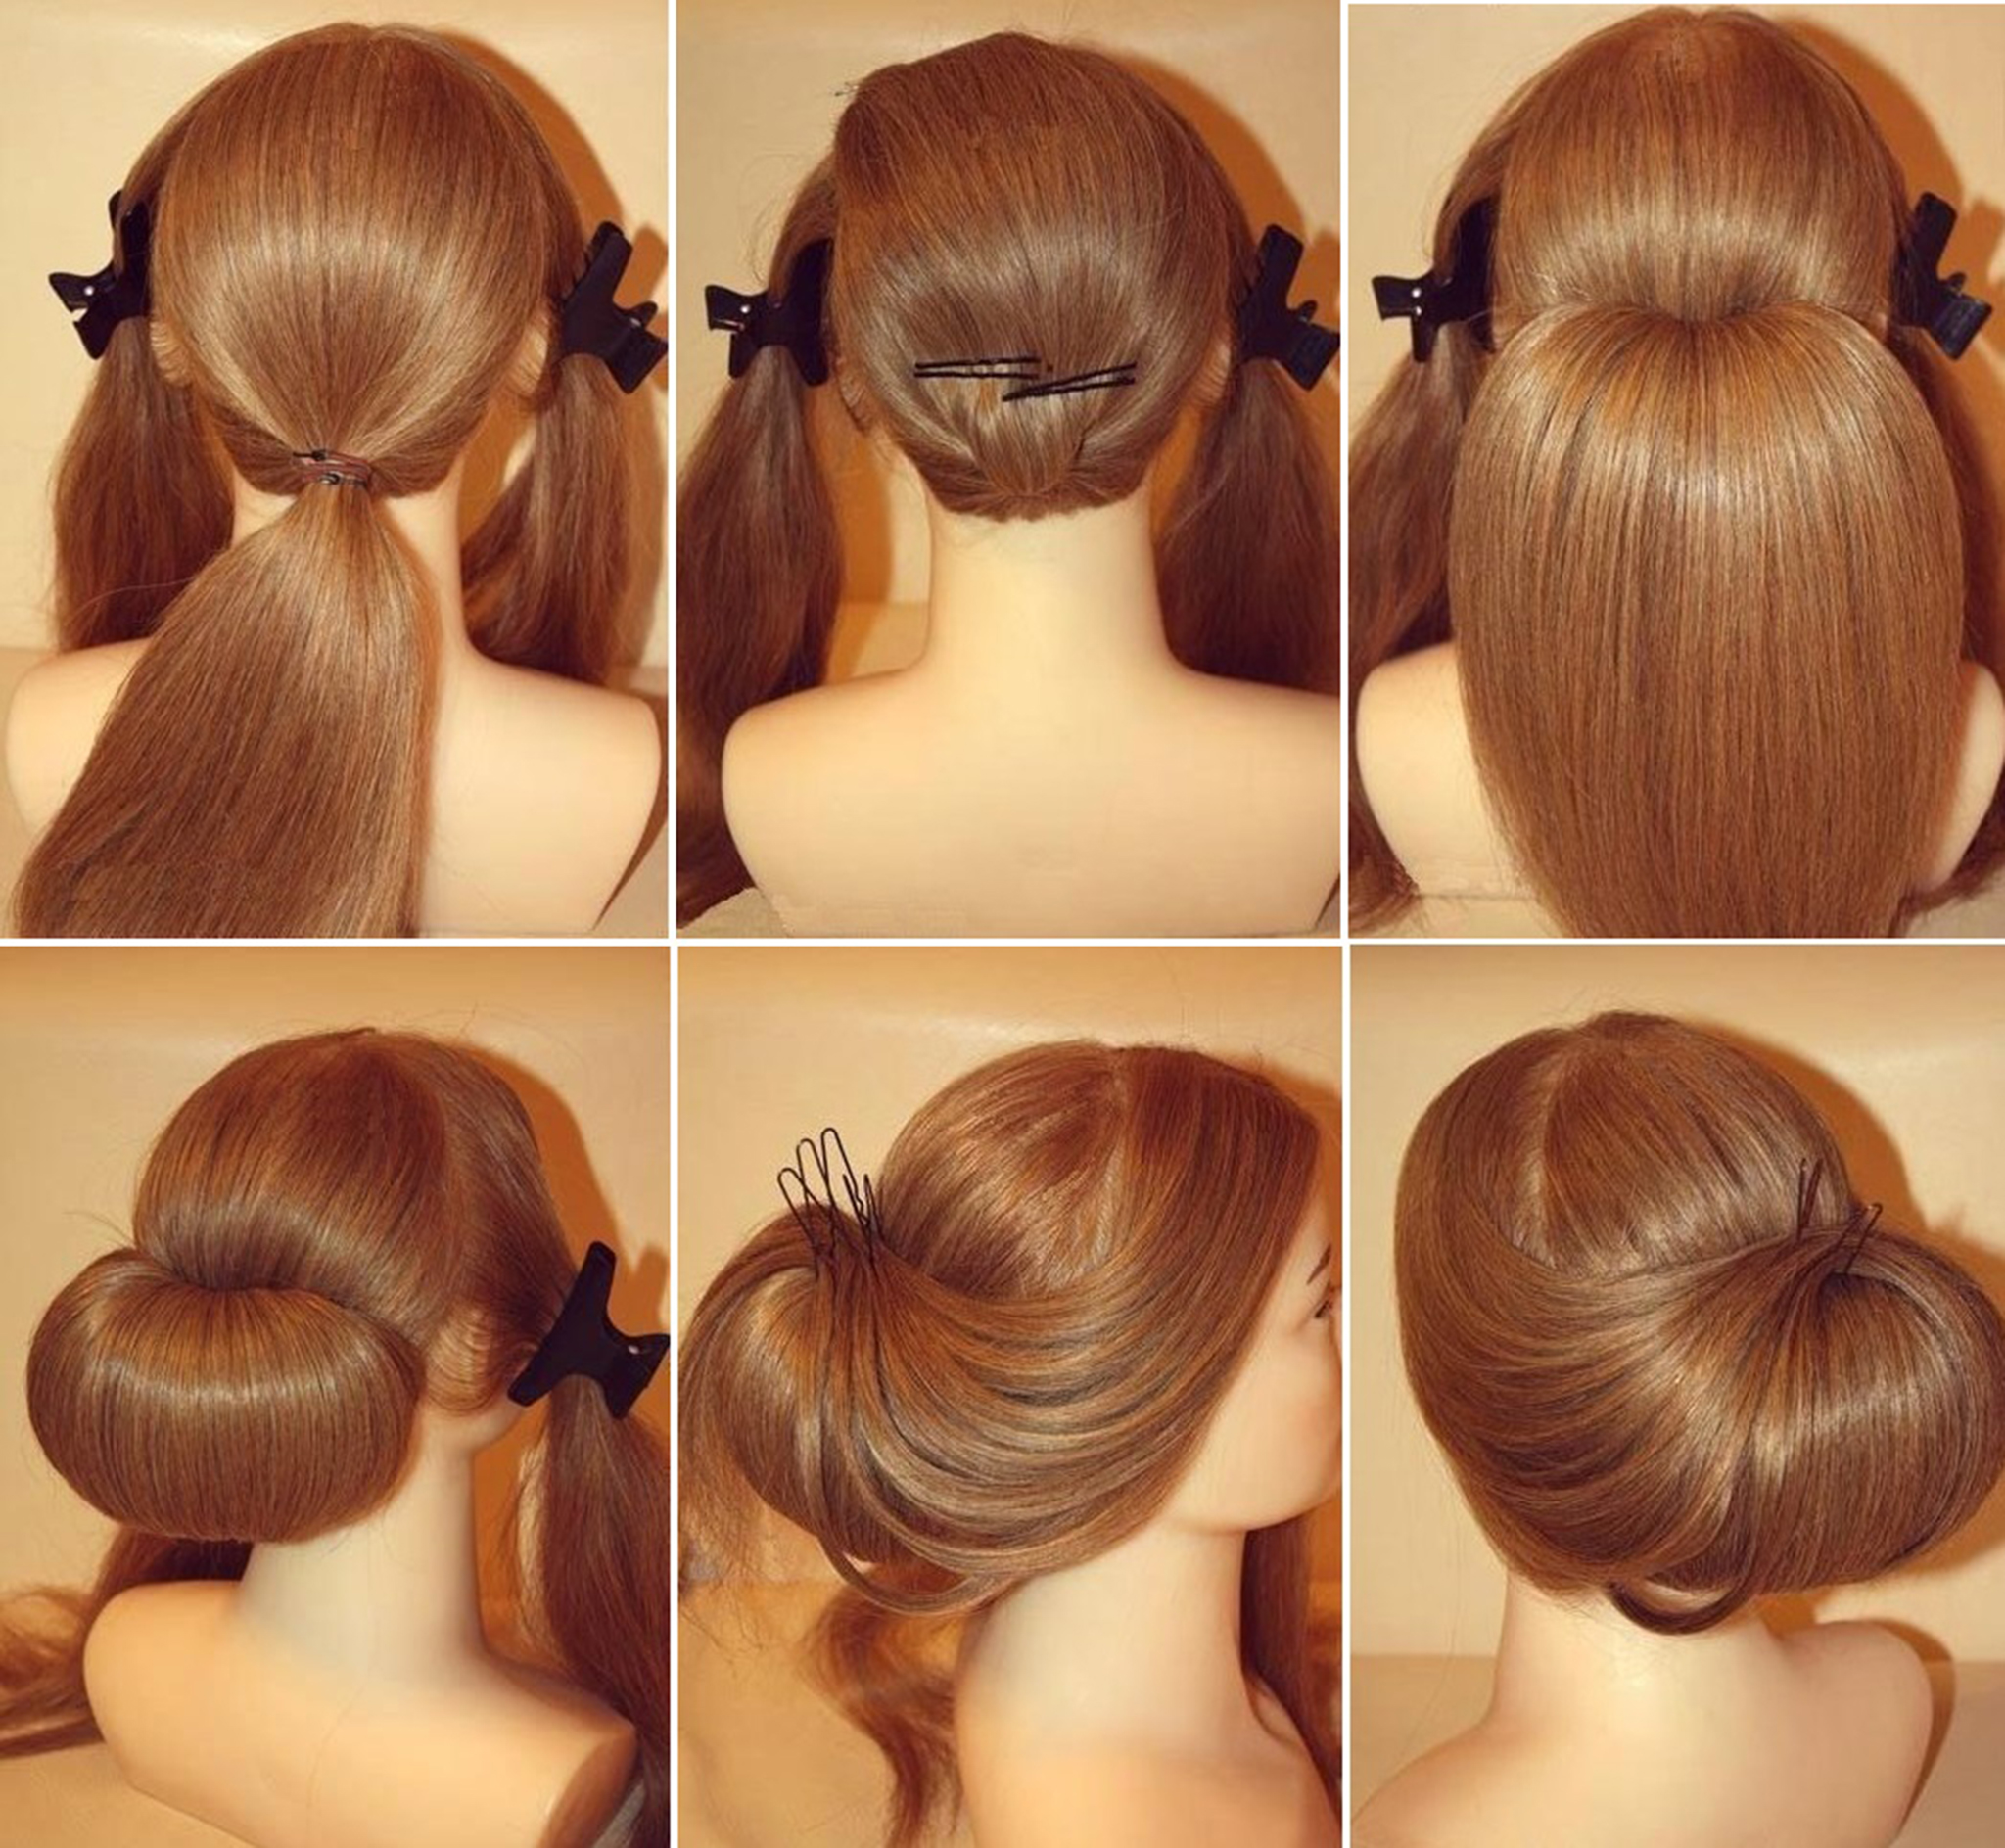 12 Most Beautiful Hairstyles You Will Love Easy Step By Step